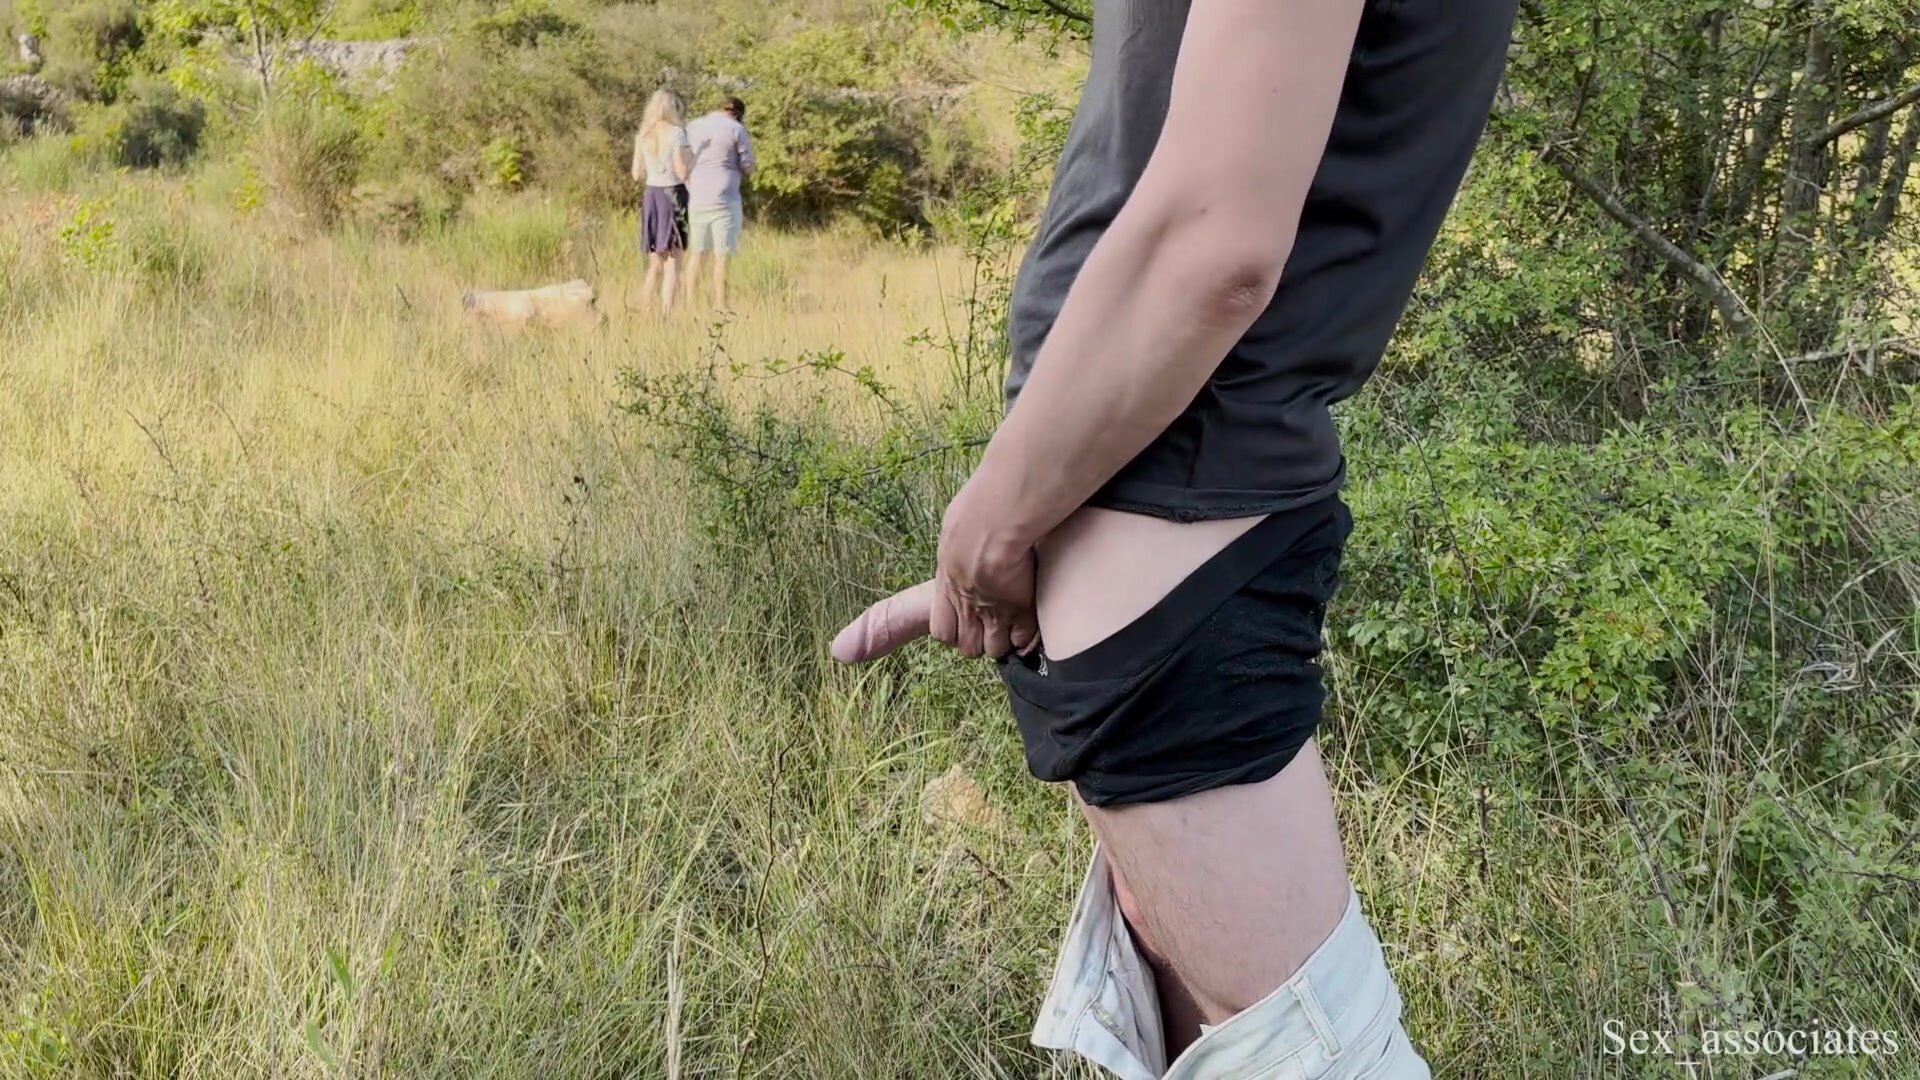 Sex_Associates - Public dick flash in front of the couple of hikers. She helped me cum while he was on the phone.